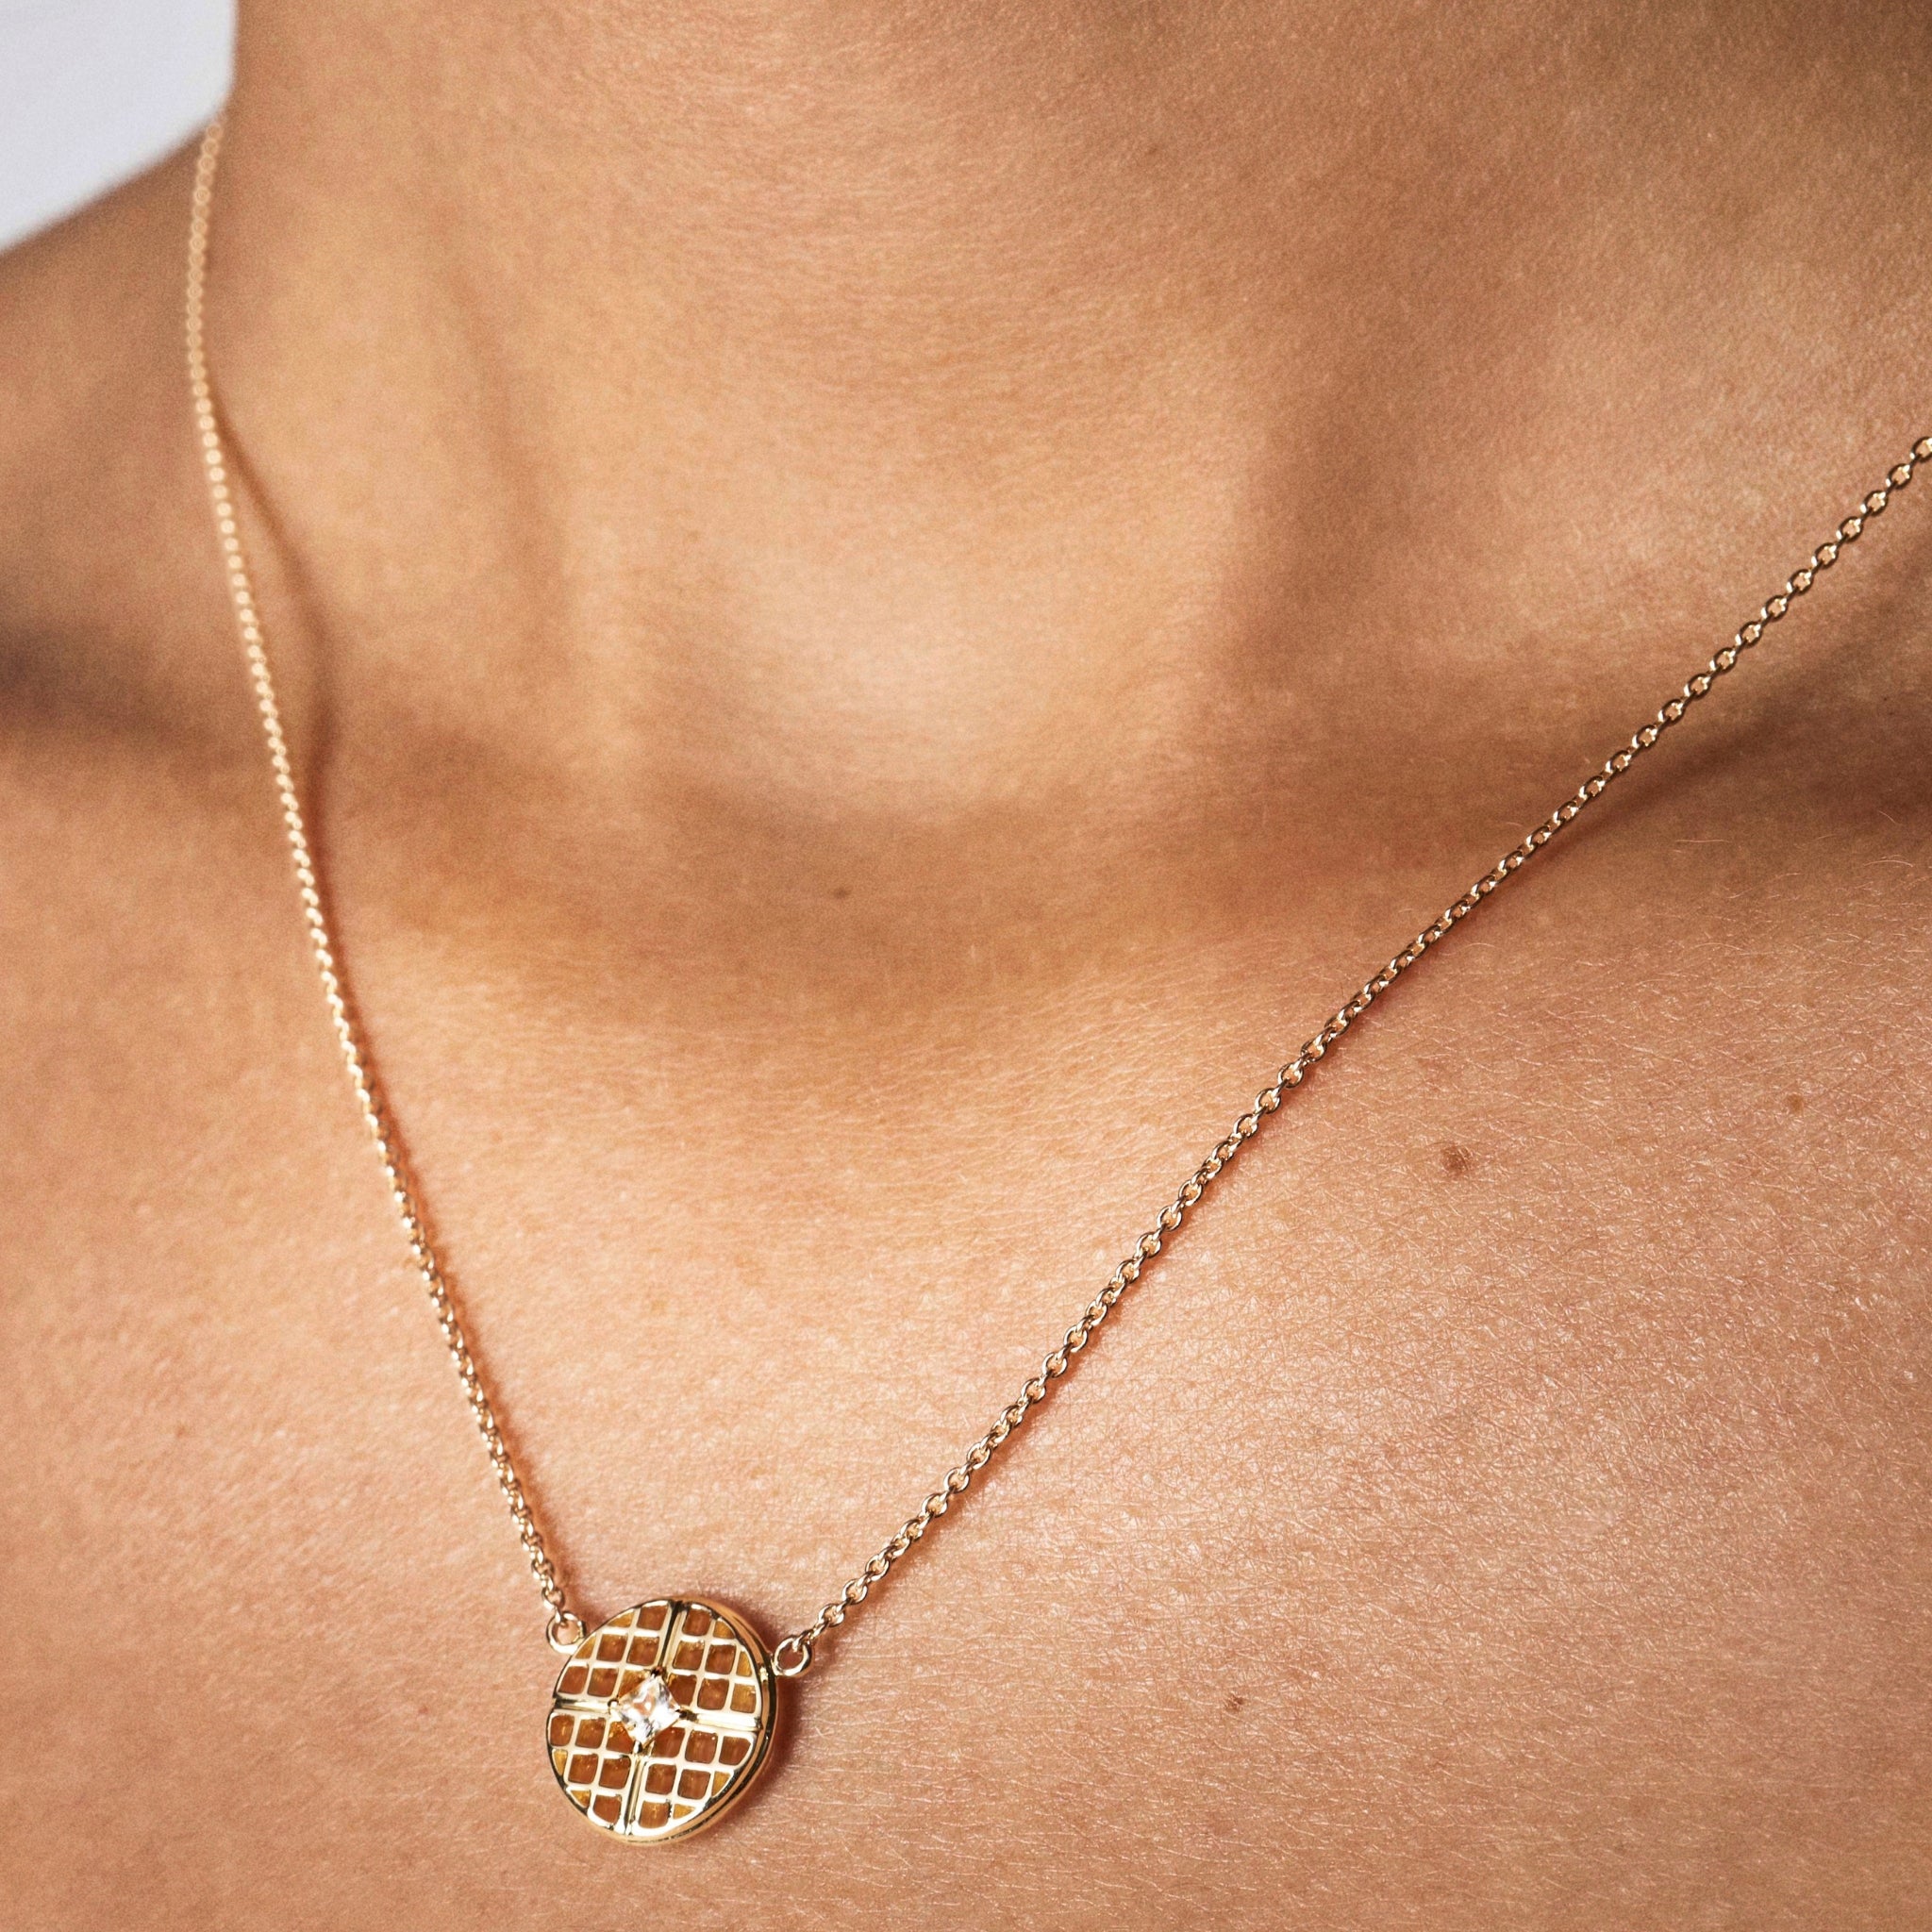 Butter on a Hot Waffle Necklace